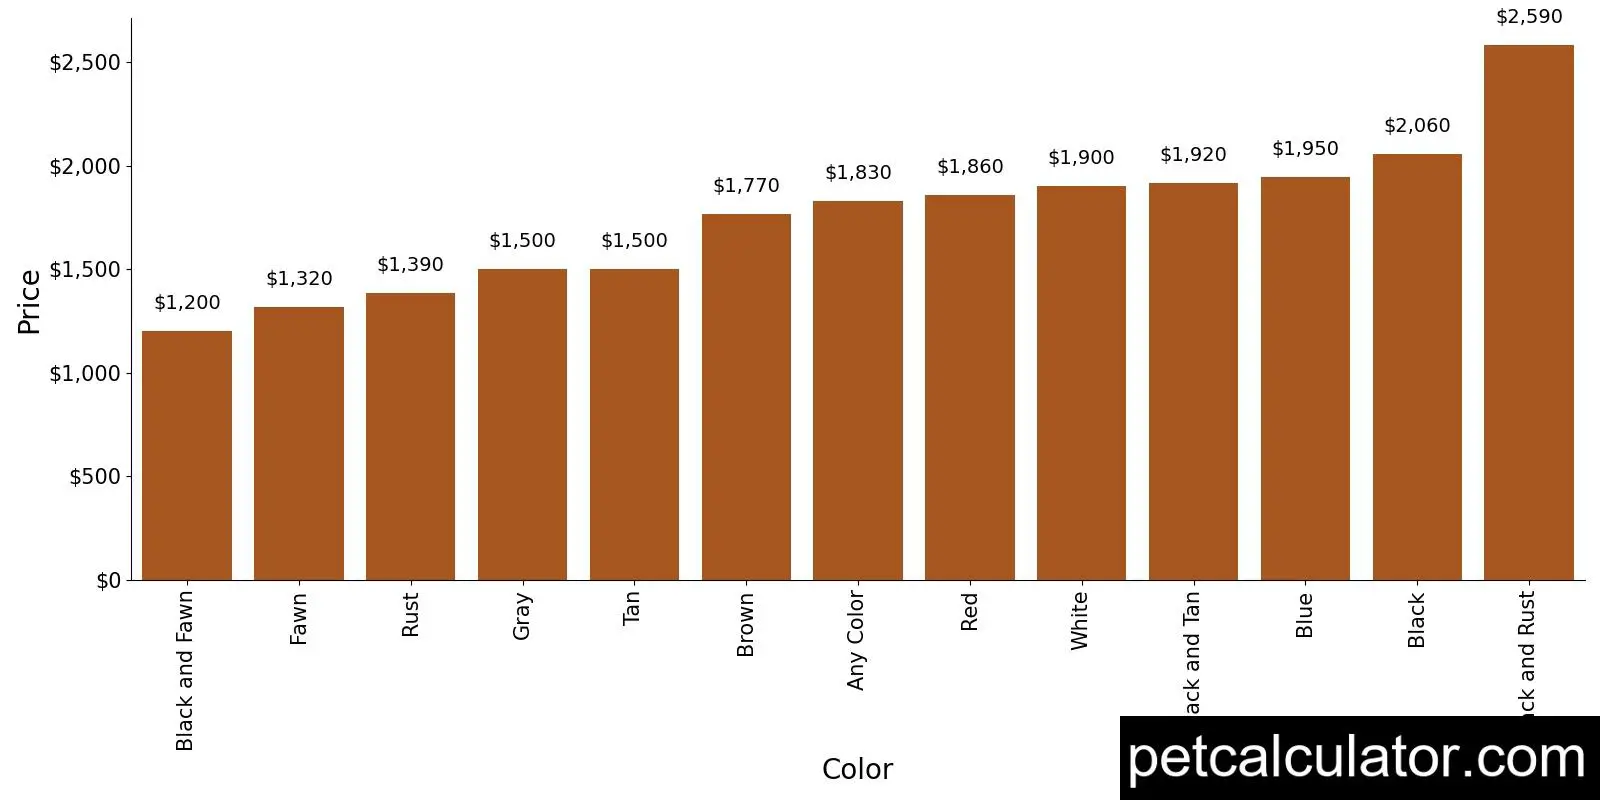 Price of Doberman Pinscher by Color 